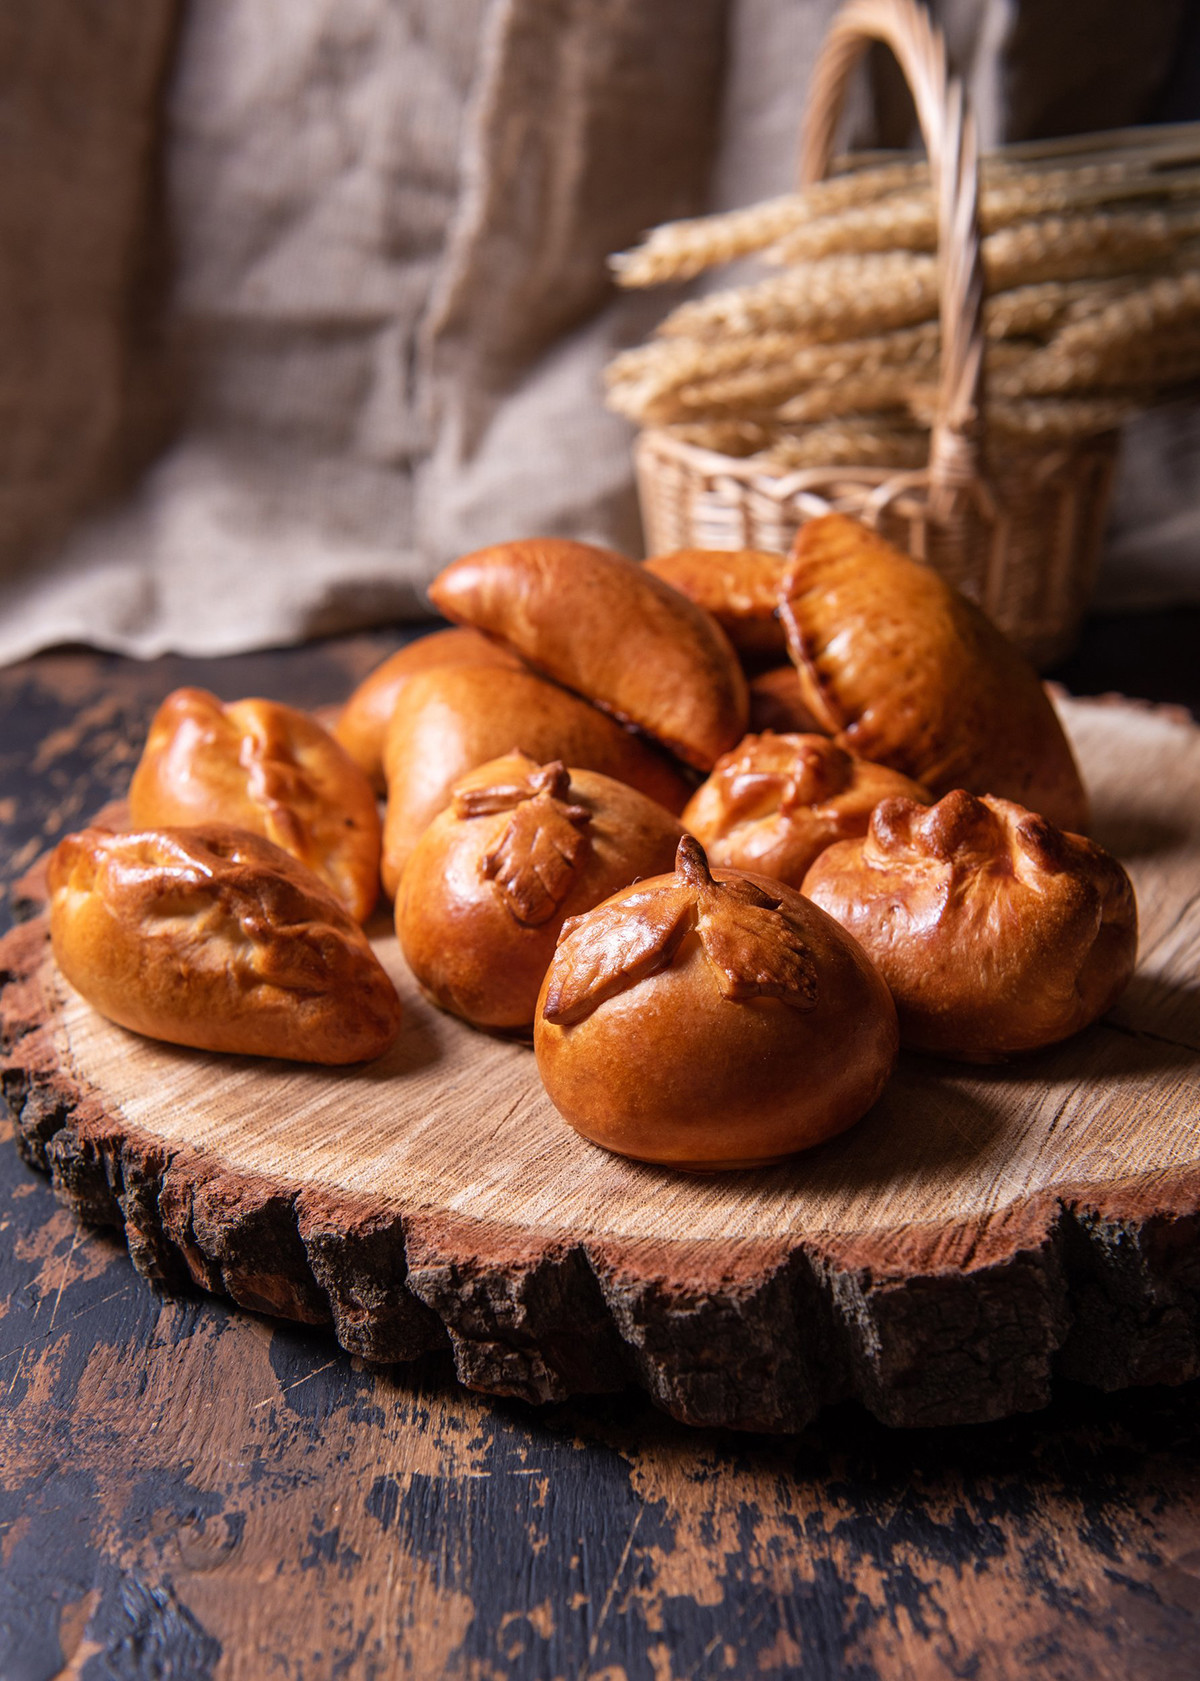 Pirozhki, the must-have of every Russian table